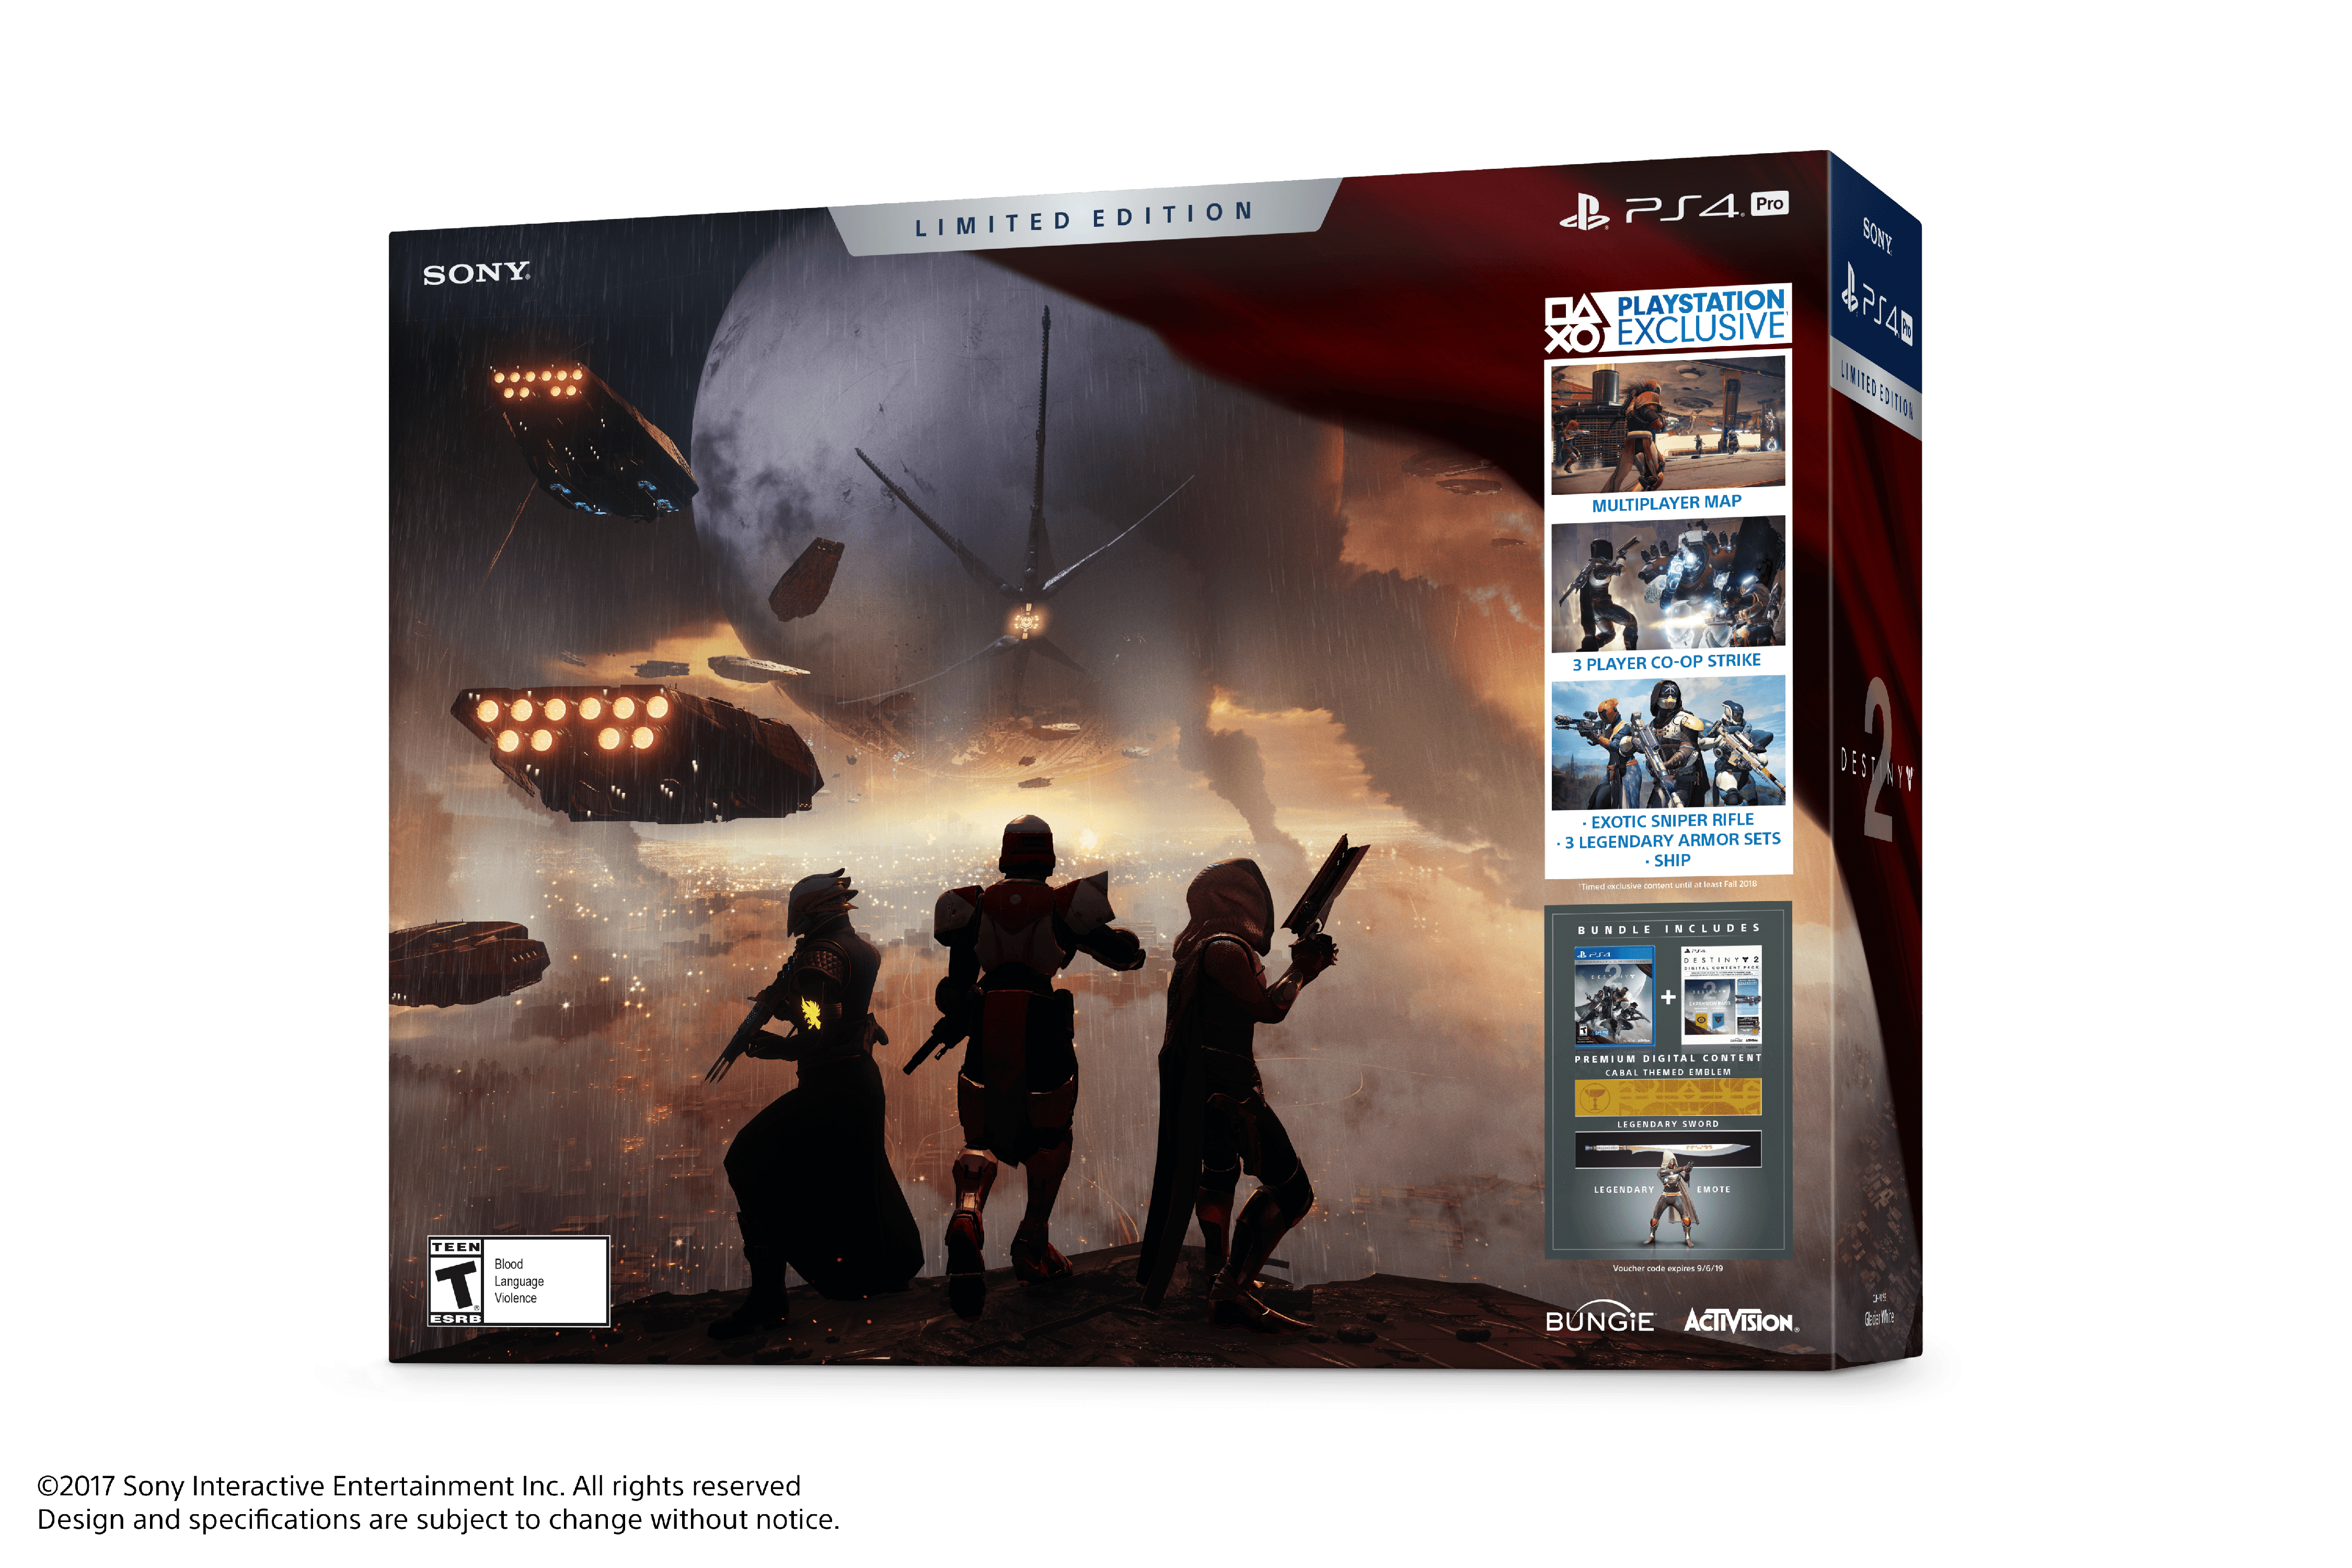 PS5 Pro PlayStation 5 Pro destiny 2 Limited Edition Glacier White for